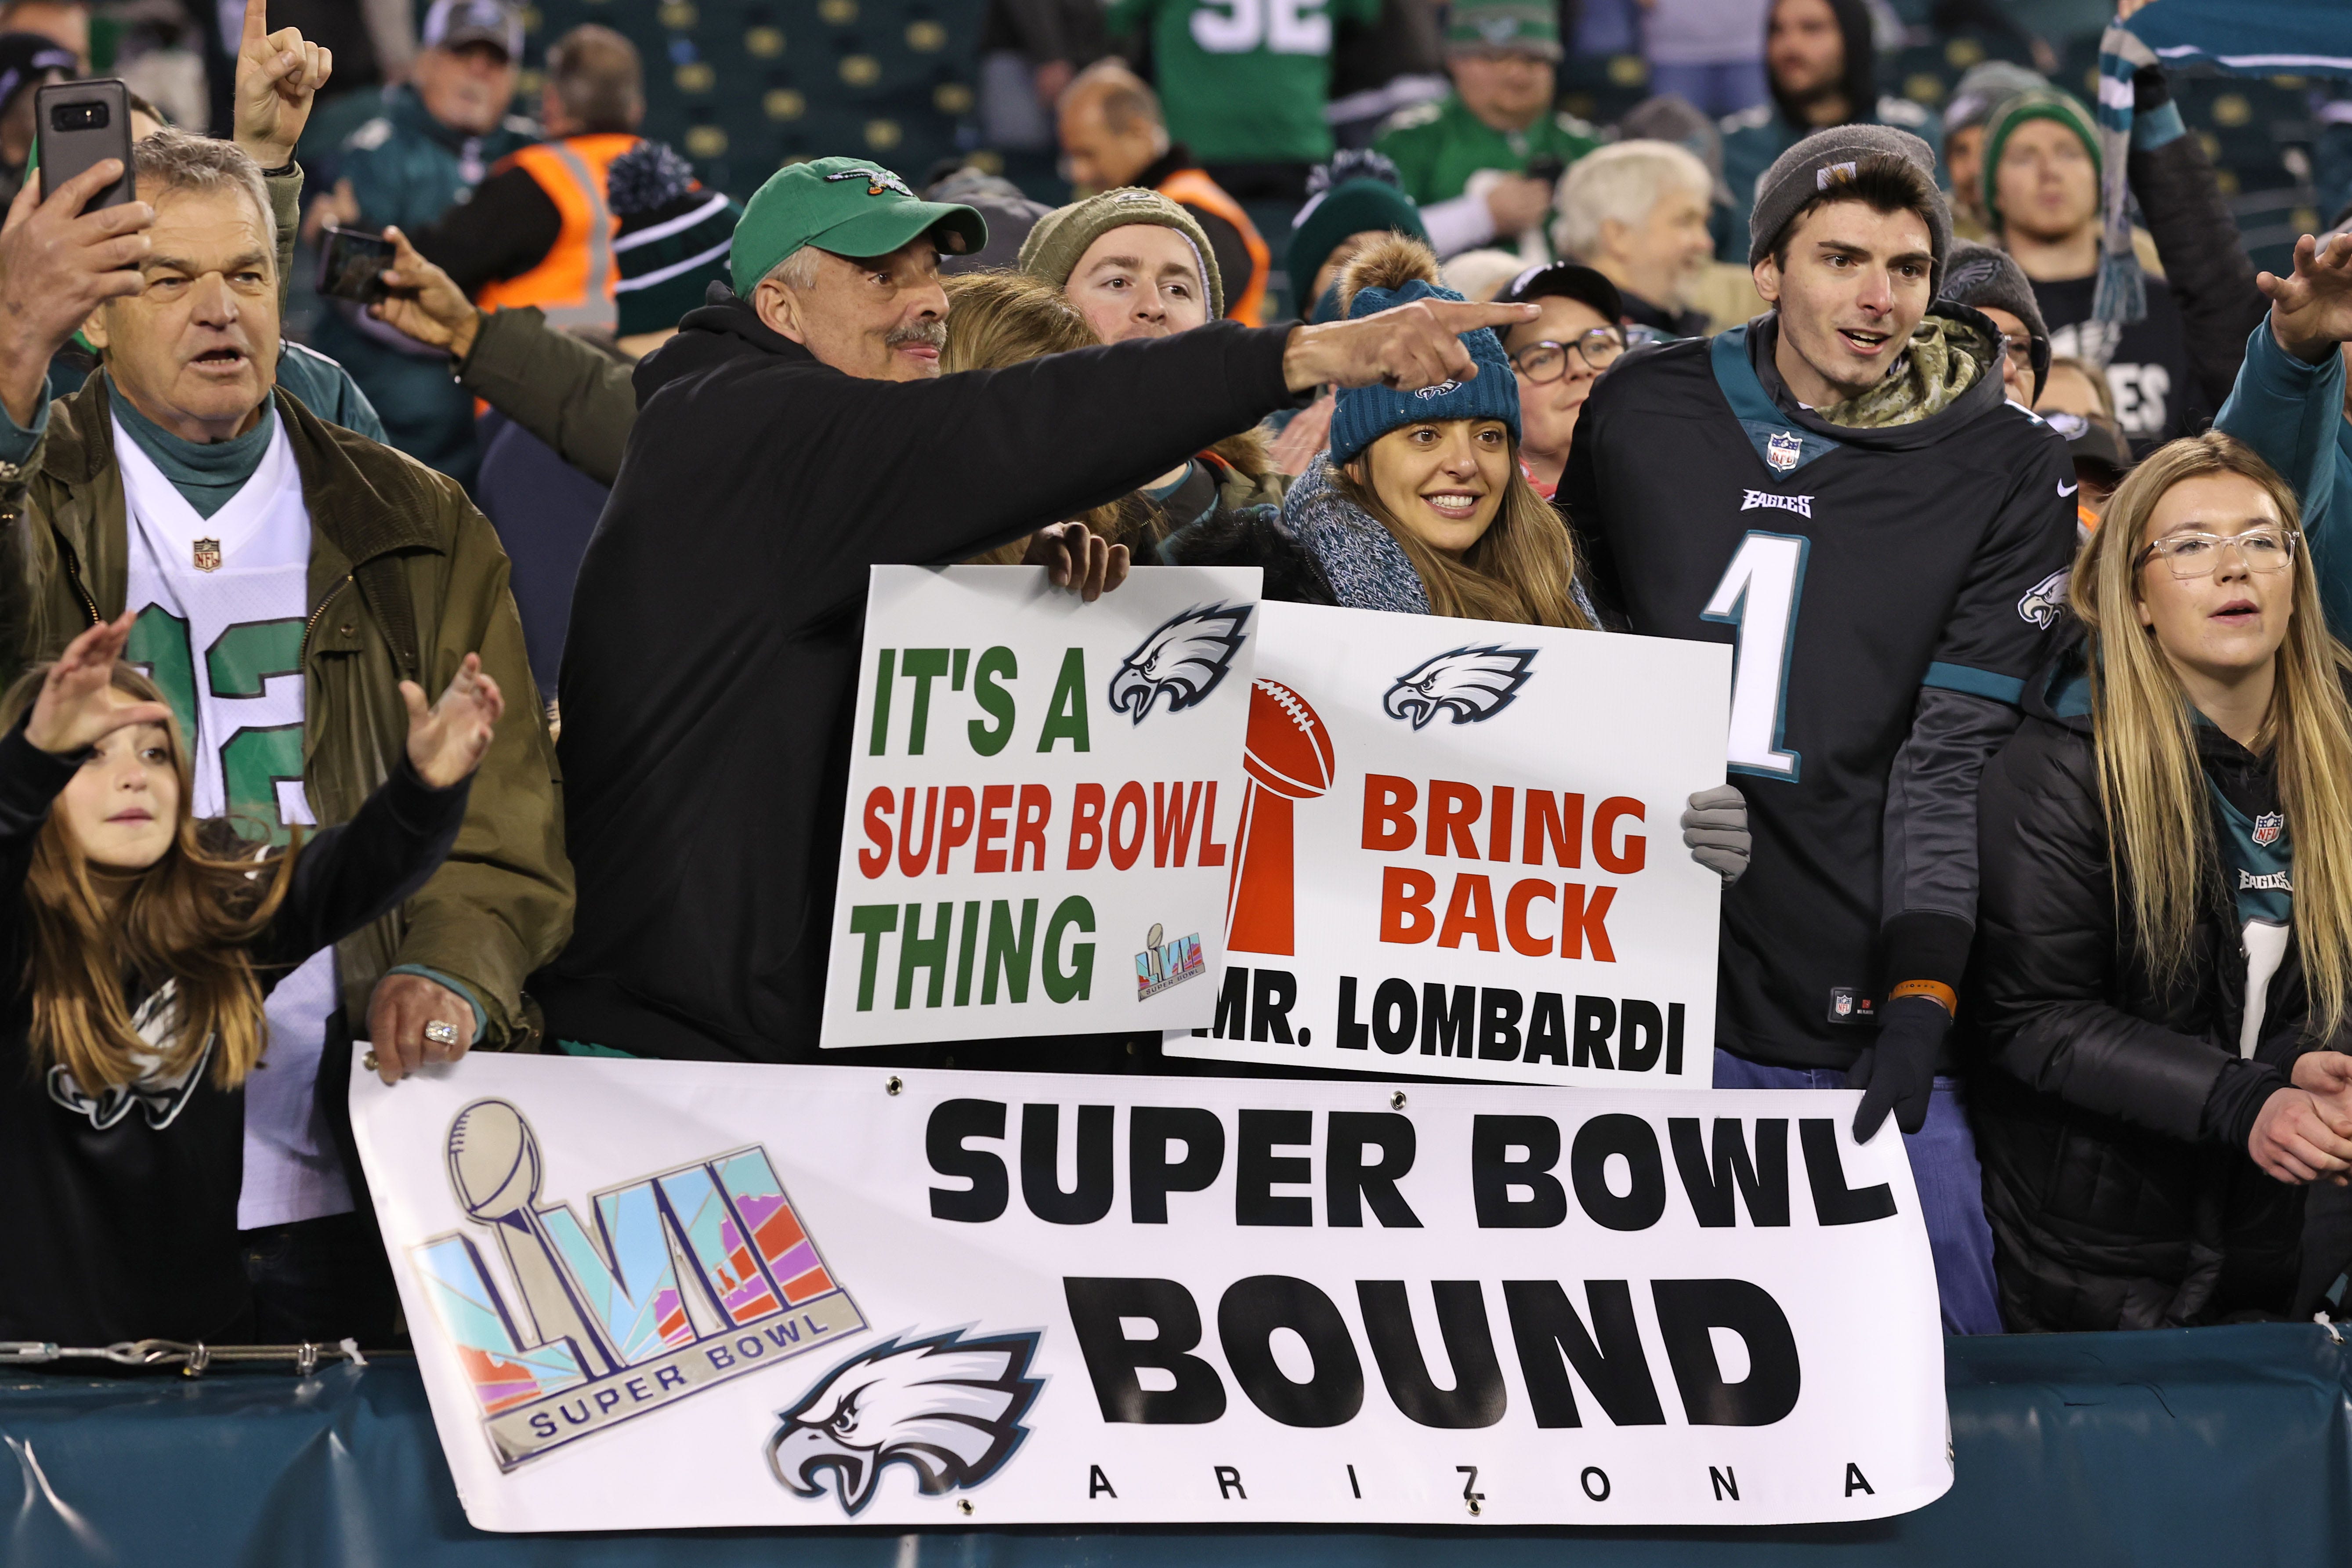 Philadelphia-area school district announces delay for day after Eagles play in Super Bowl 57